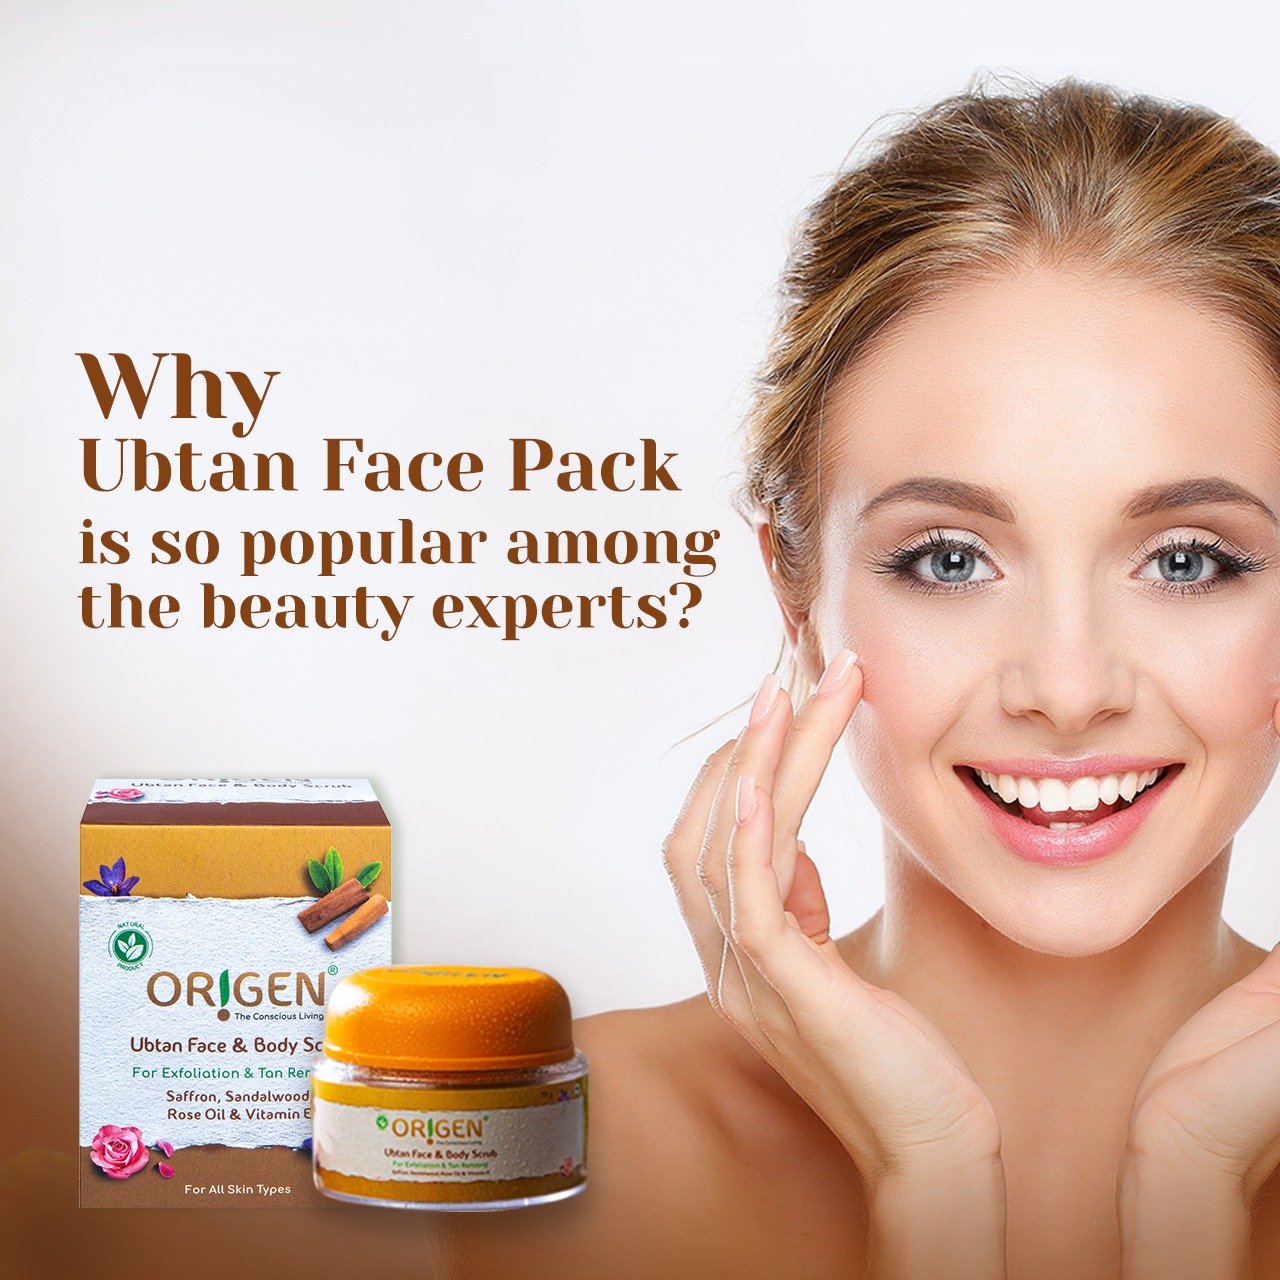 Why Ubtan Face Pack is so popular among the beauty experts